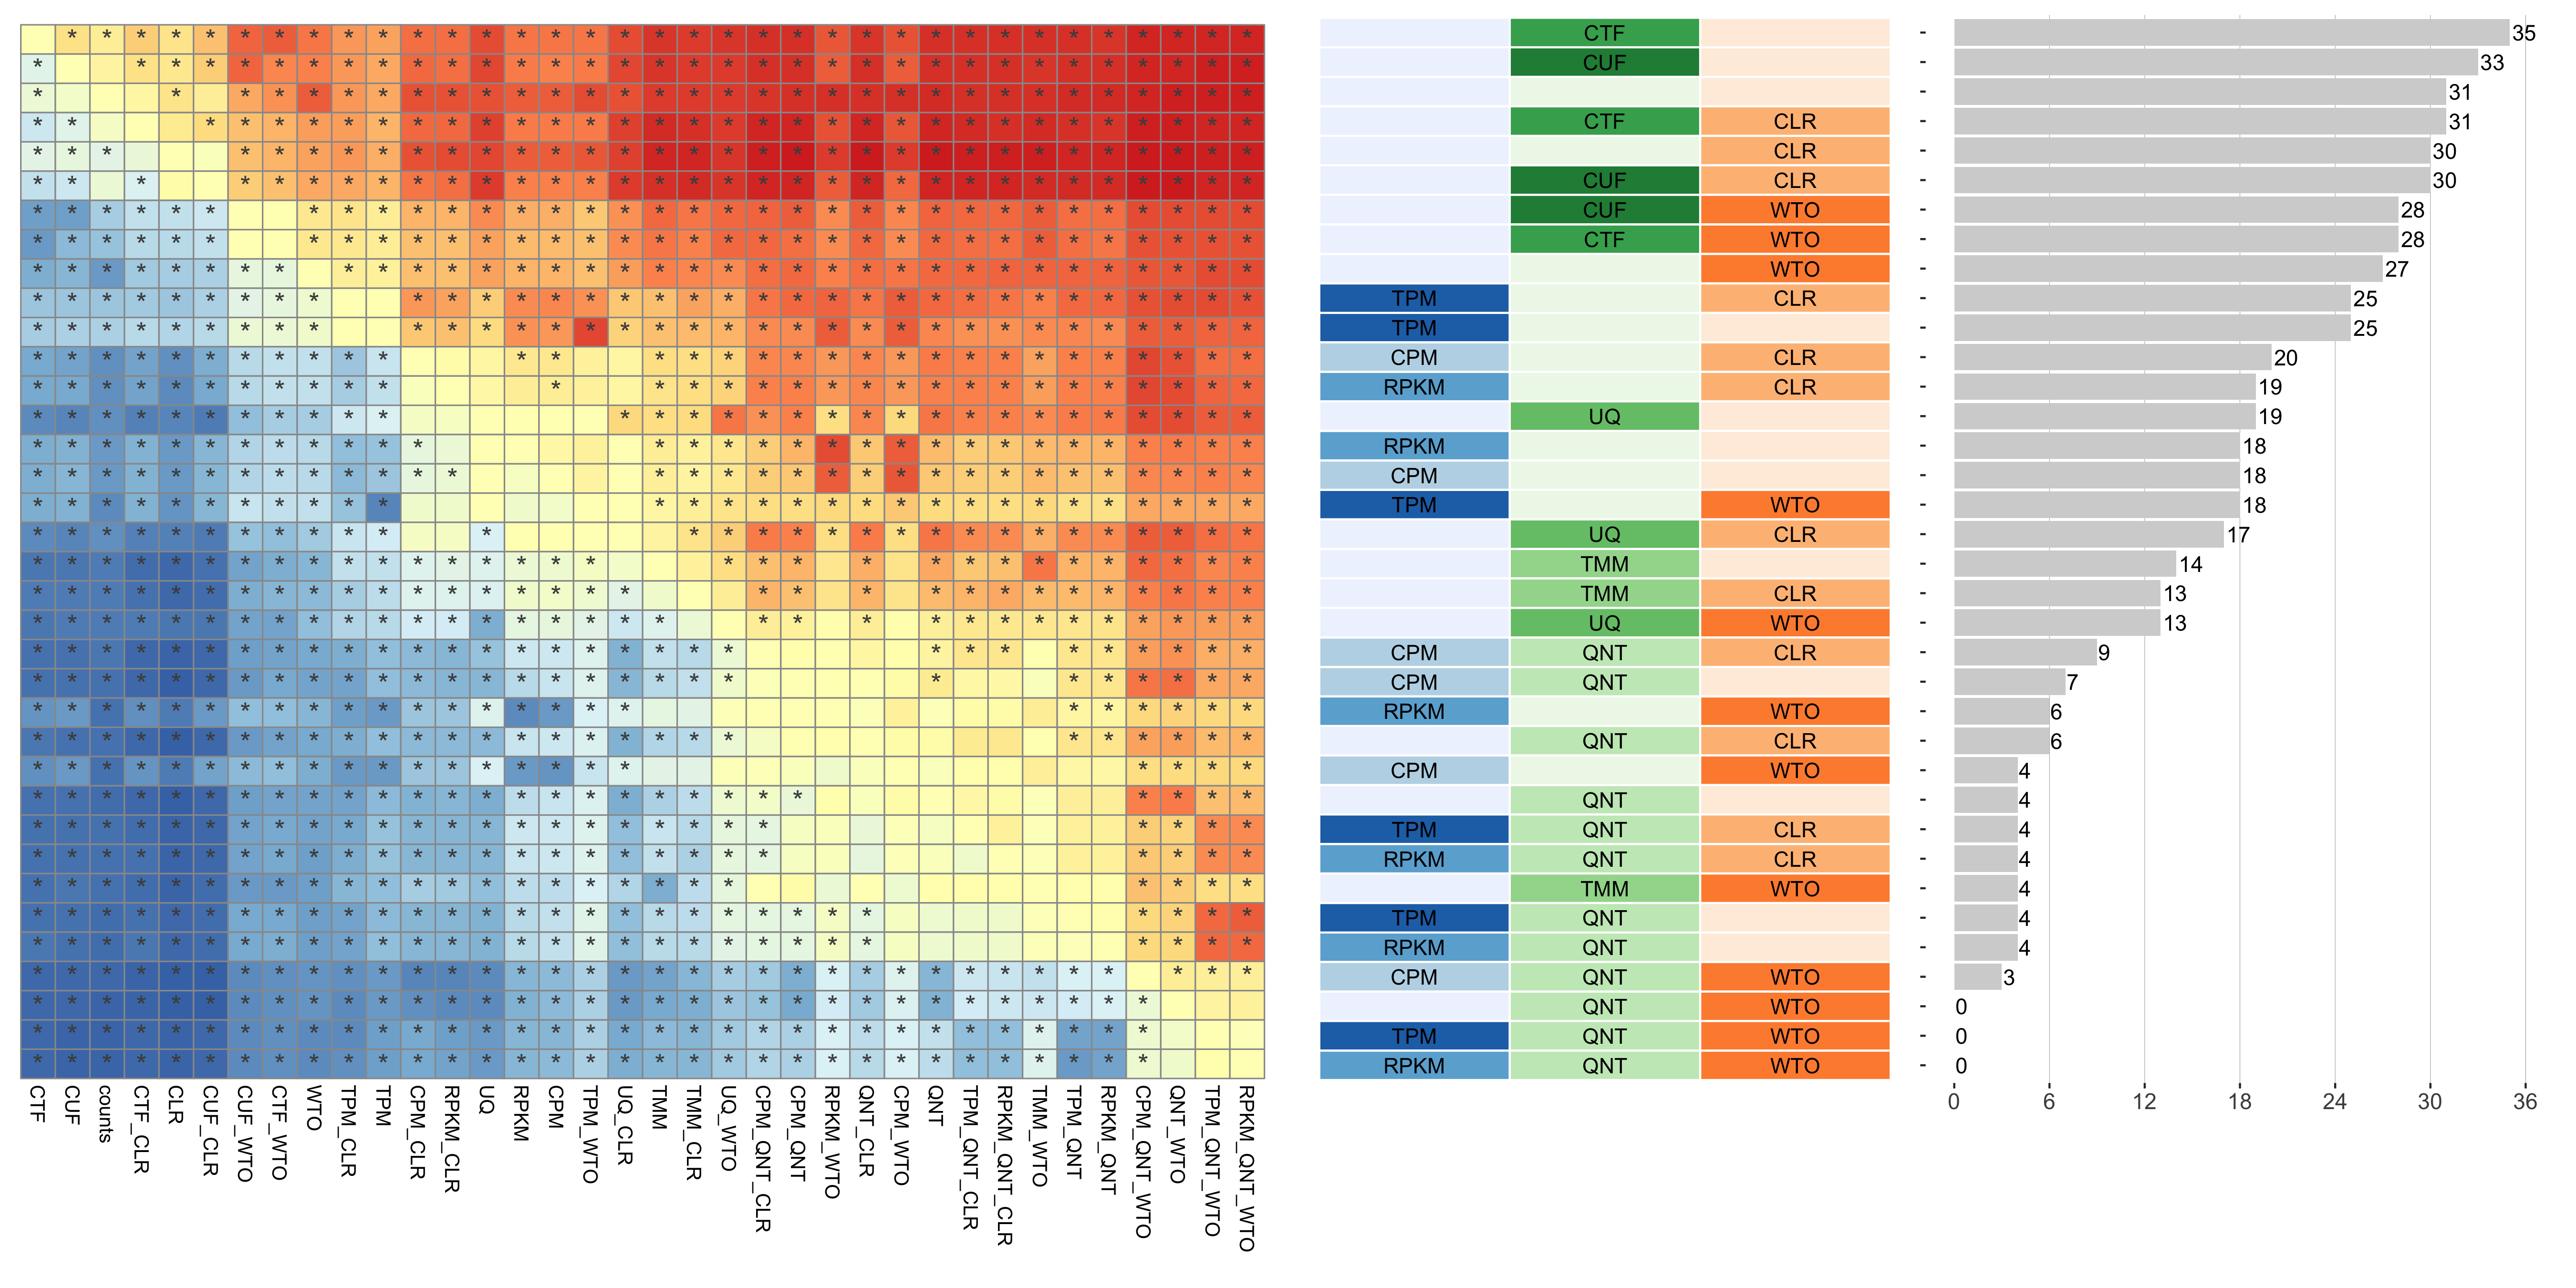 **Dataset-level pairwise comparison of workflow performance.** (**left**) The heatmap shows the relative performance of a pair of workflows, corresponding to a row and a column, directly compared to each other for the SRA datasets based on the tissue-naive gold standard. The color in each cell (row, column) represents the proportion of datasets for which the workflow along the row has a higher auROC than the workflow along the column. Comparisons that are statistically significant (corrected p < 0.01) based on a paired Wilcoxon test are marked with an asterisk. (**middle**) The workflows (rows) are described in terms of the specific method used in the within-sample normalization (blues), between-sample normalization (greens), and network transformation (oranges) stages. (**right**) The barplot shows the number of times each workflow was significantly greater than another workflow.